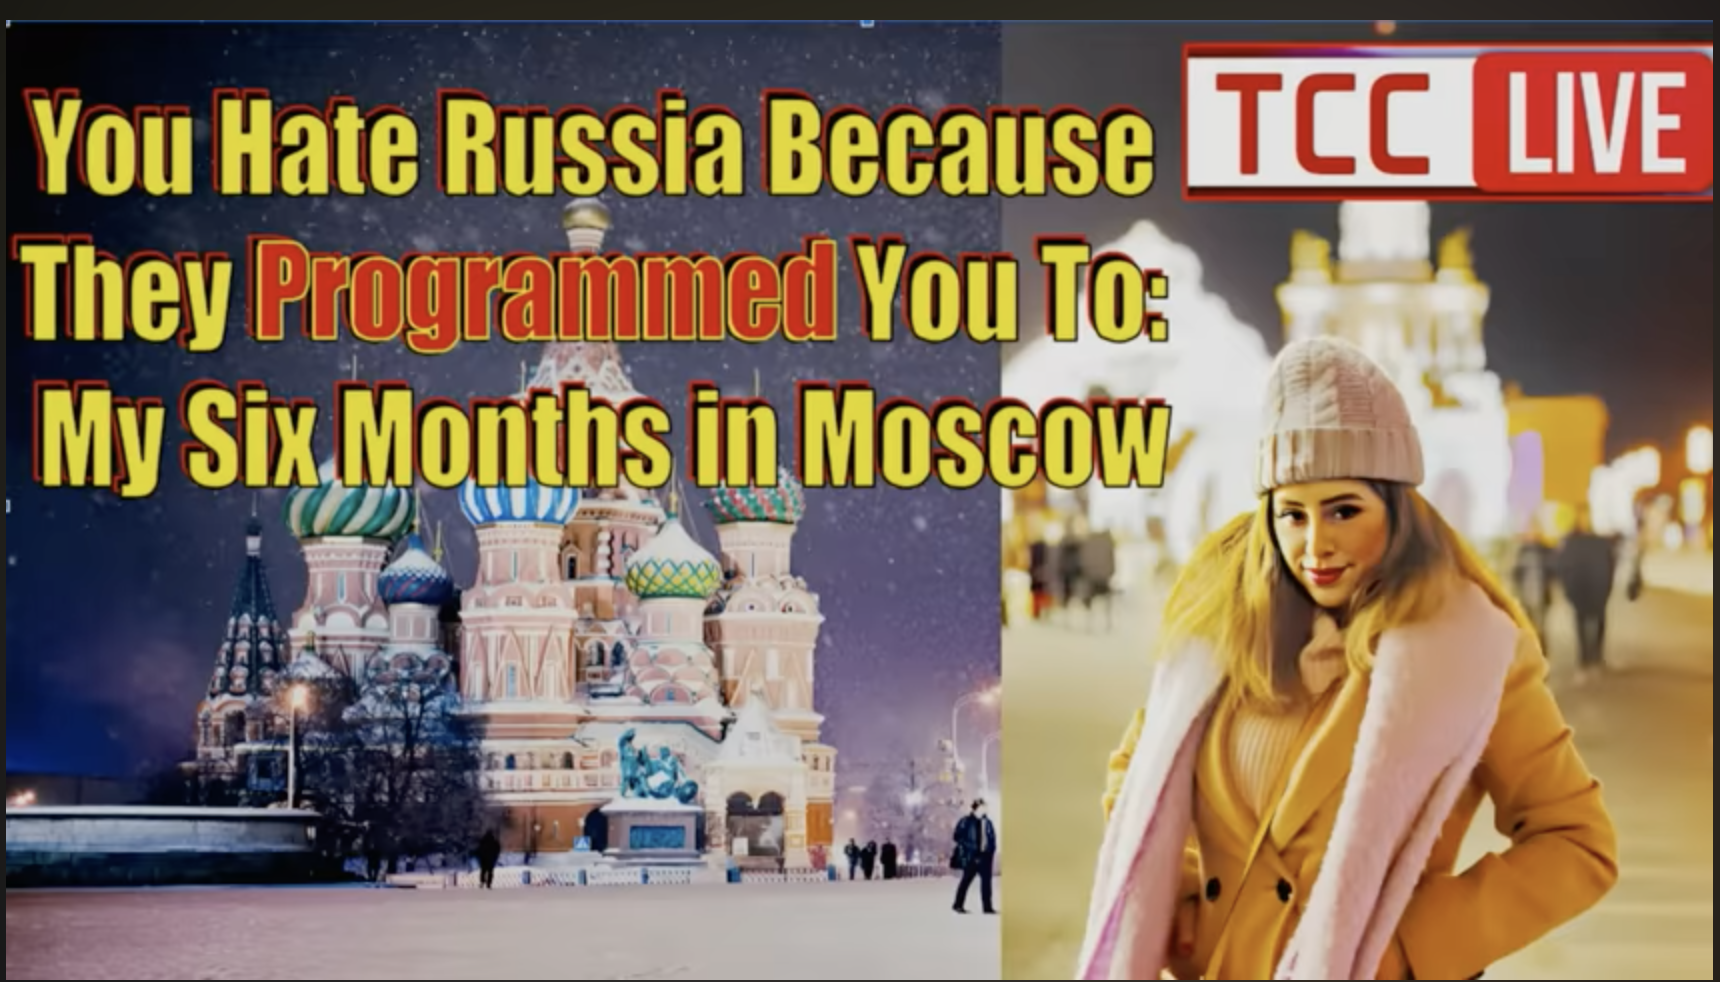 You Hate Russia Because They Programmed You To: My Six Months in Moscow